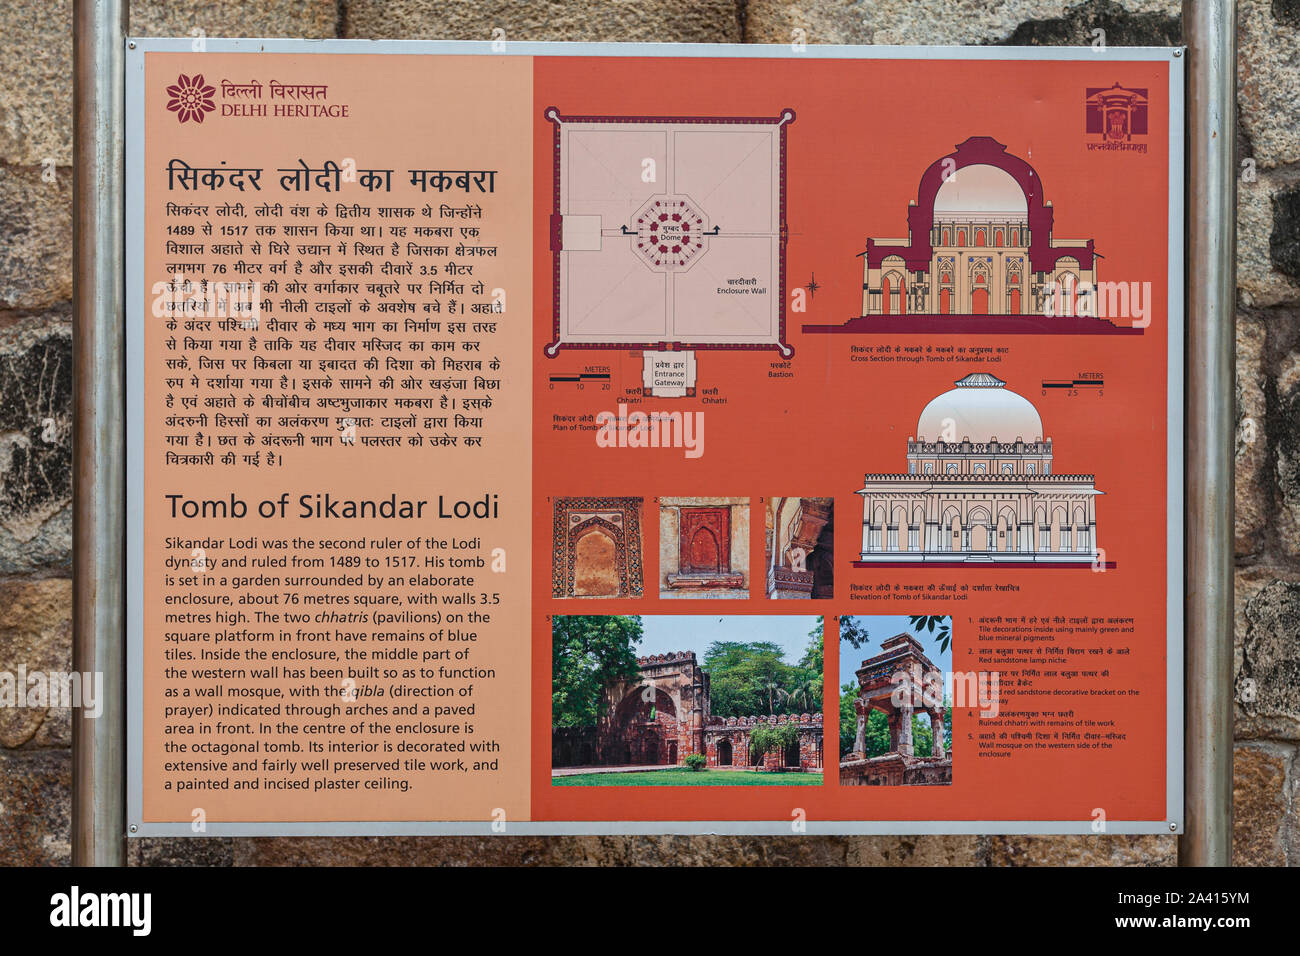 DELHI, INDIA, A signboard providing information about the tomb of Sikandar Lodi inside the famous Lodhi gardens Stock Photo